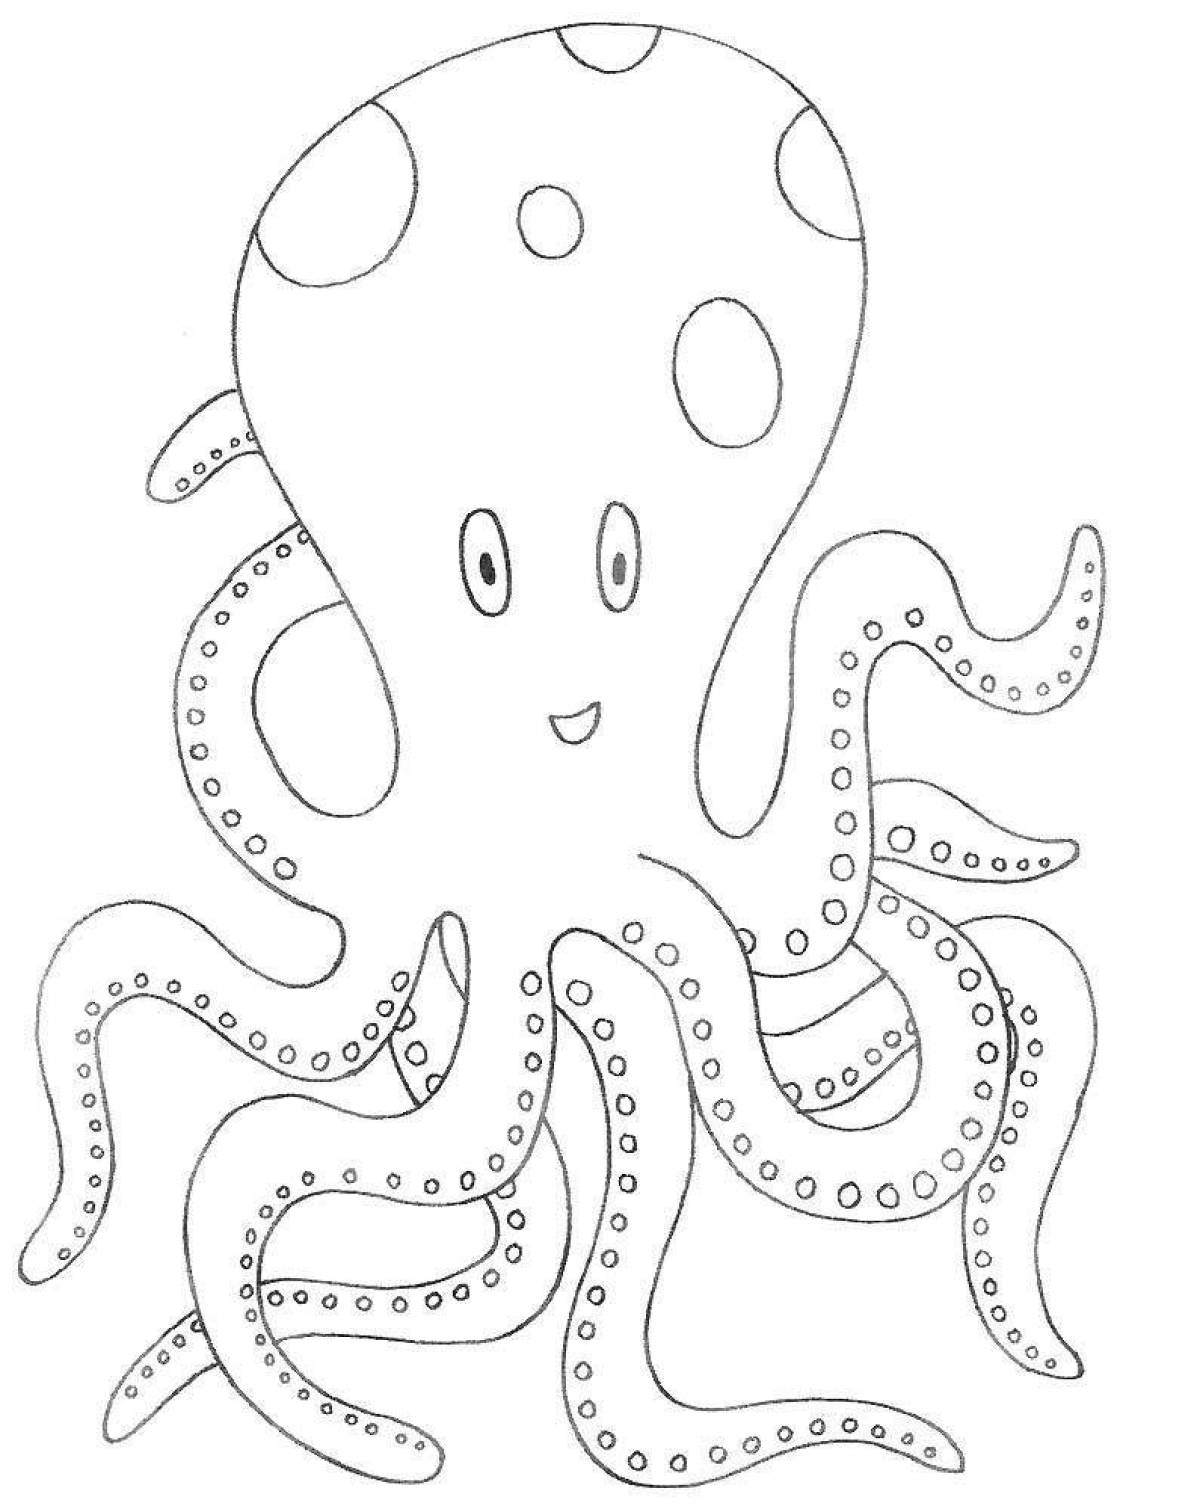 Creative marine life coloring pages for kids